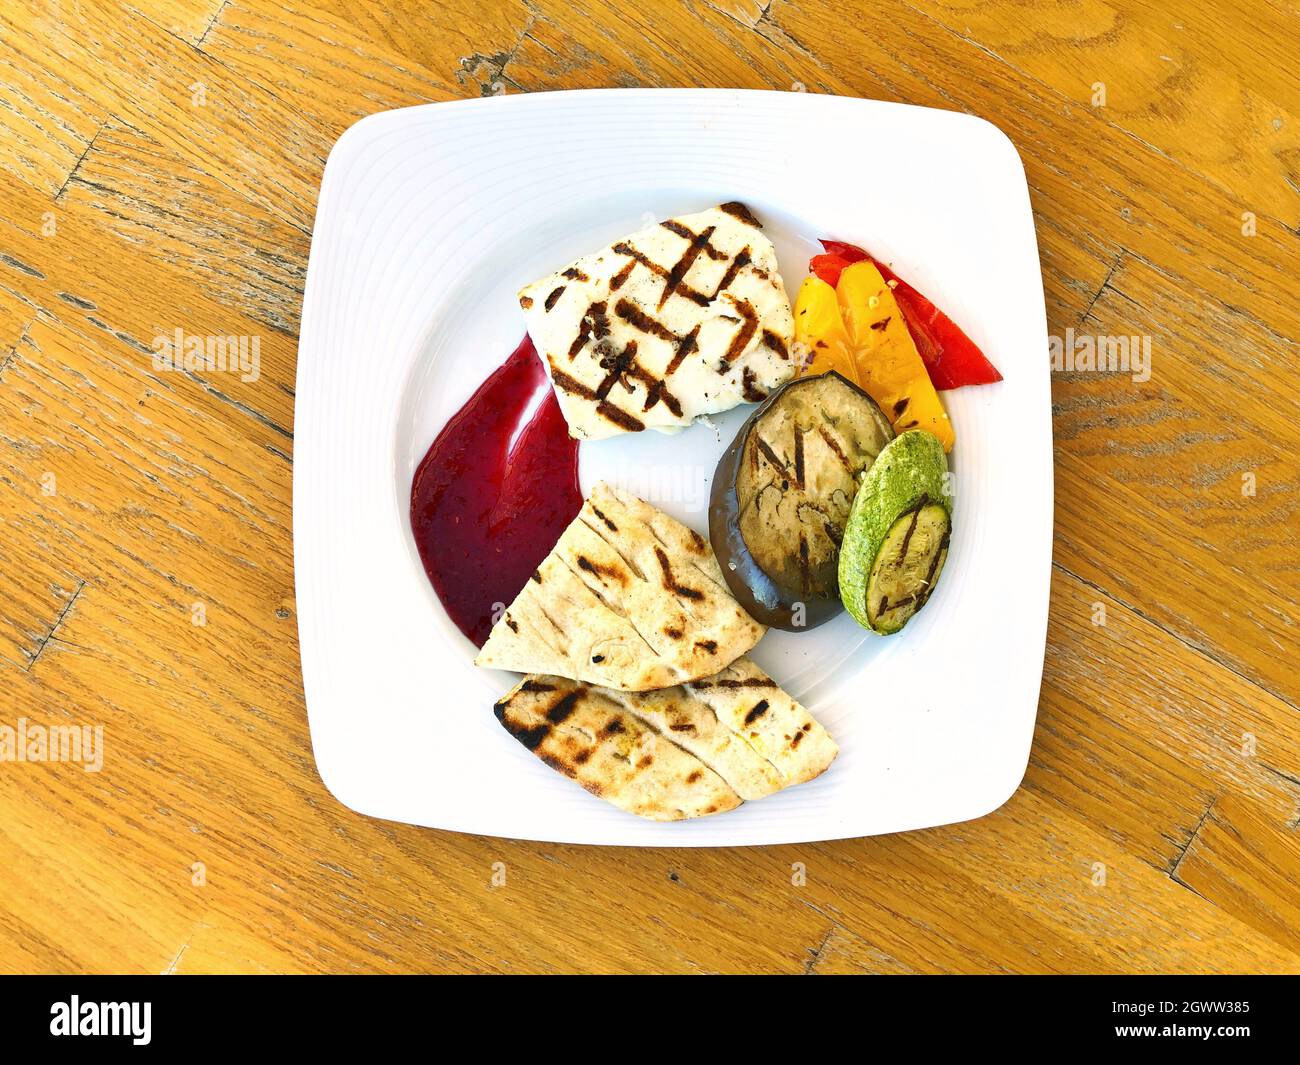 Grilled Talagani Cheese With Pita Bread And Grilled Vegetables Stock Photo  - Alamy